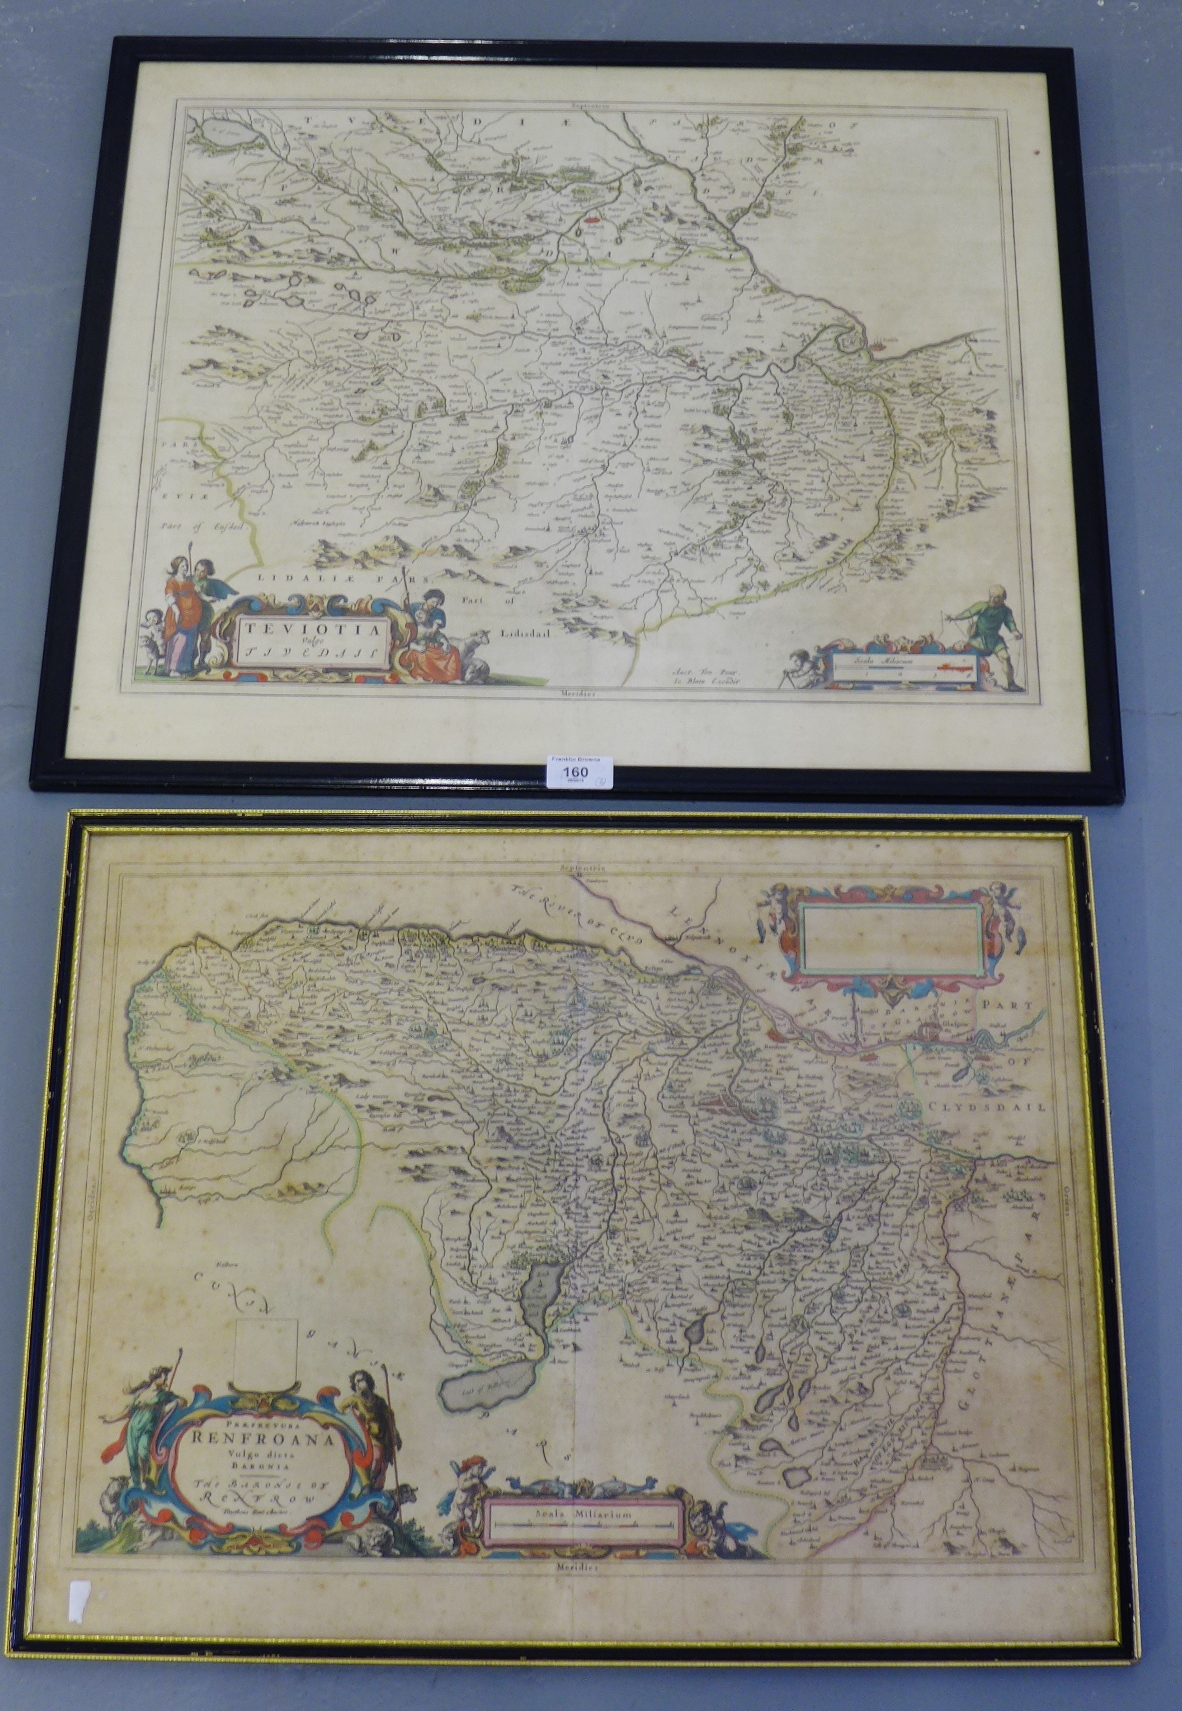 Timothy Pont, hand coloured map of Renfroana, together with another of Teviotia -  Blaeu after